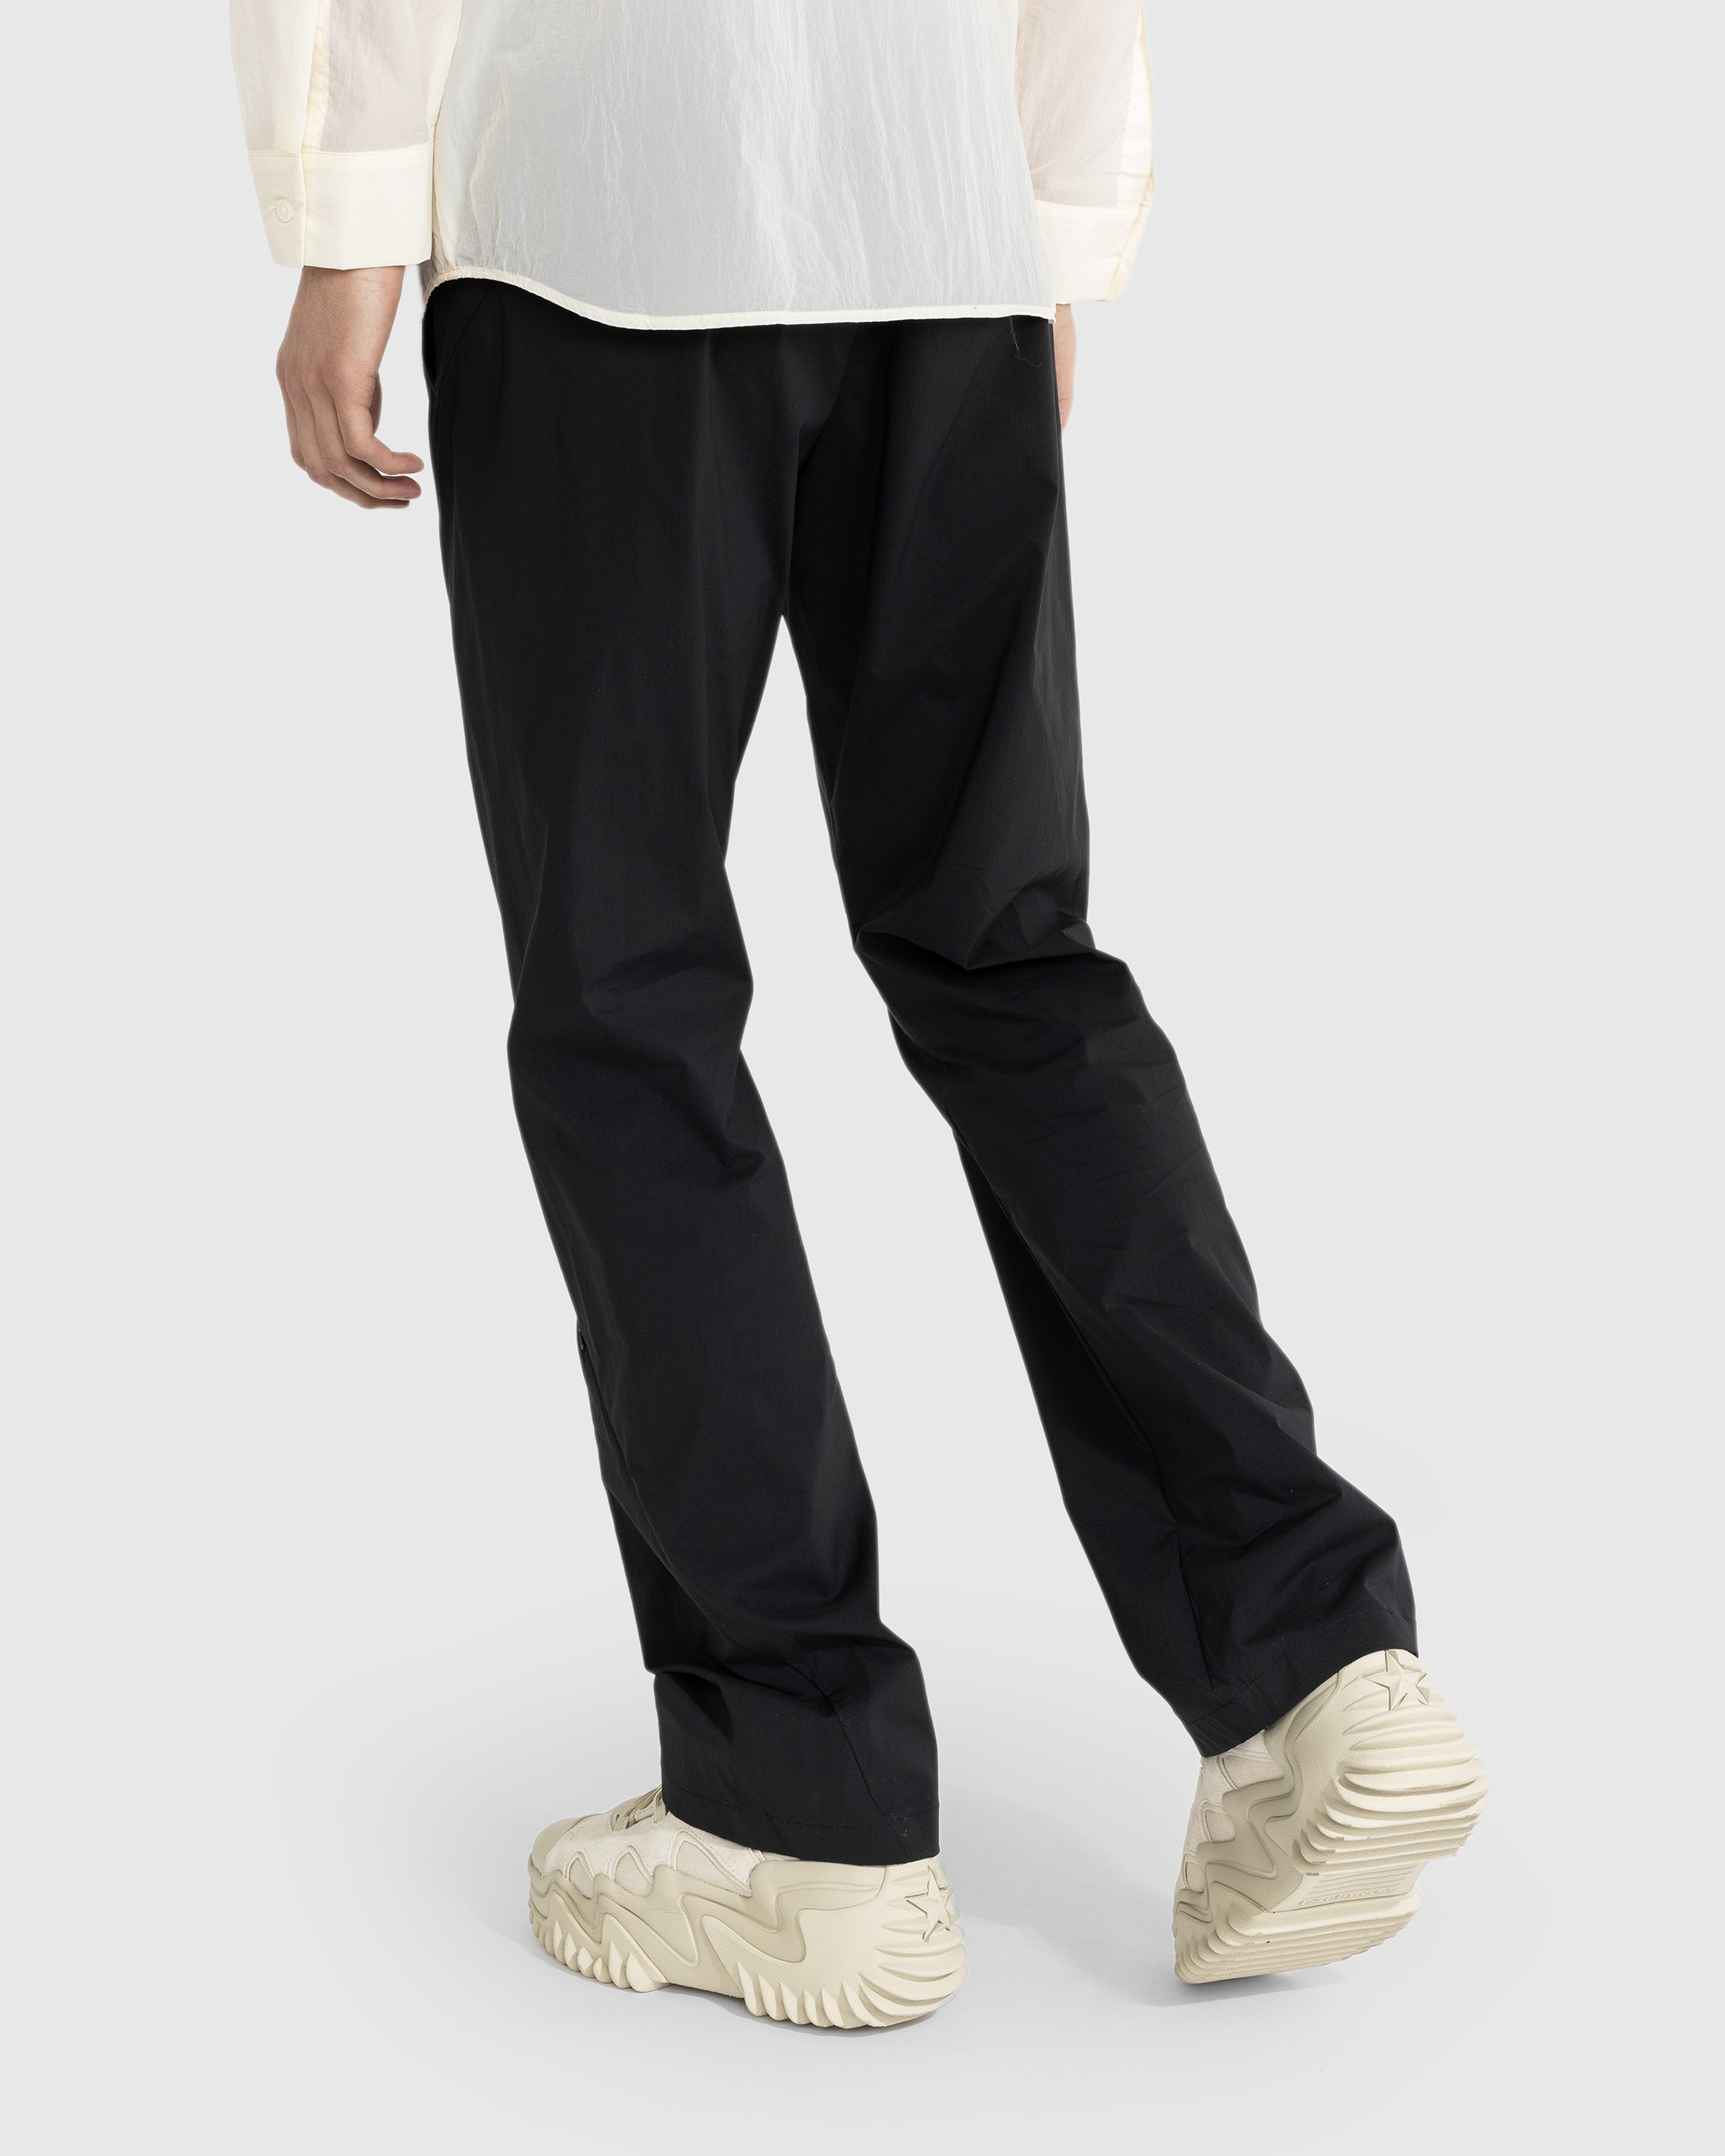 Post Archive Faction (PAF) - 5.0+ Technical Pants Right Black - Clothing - Black - Image 3